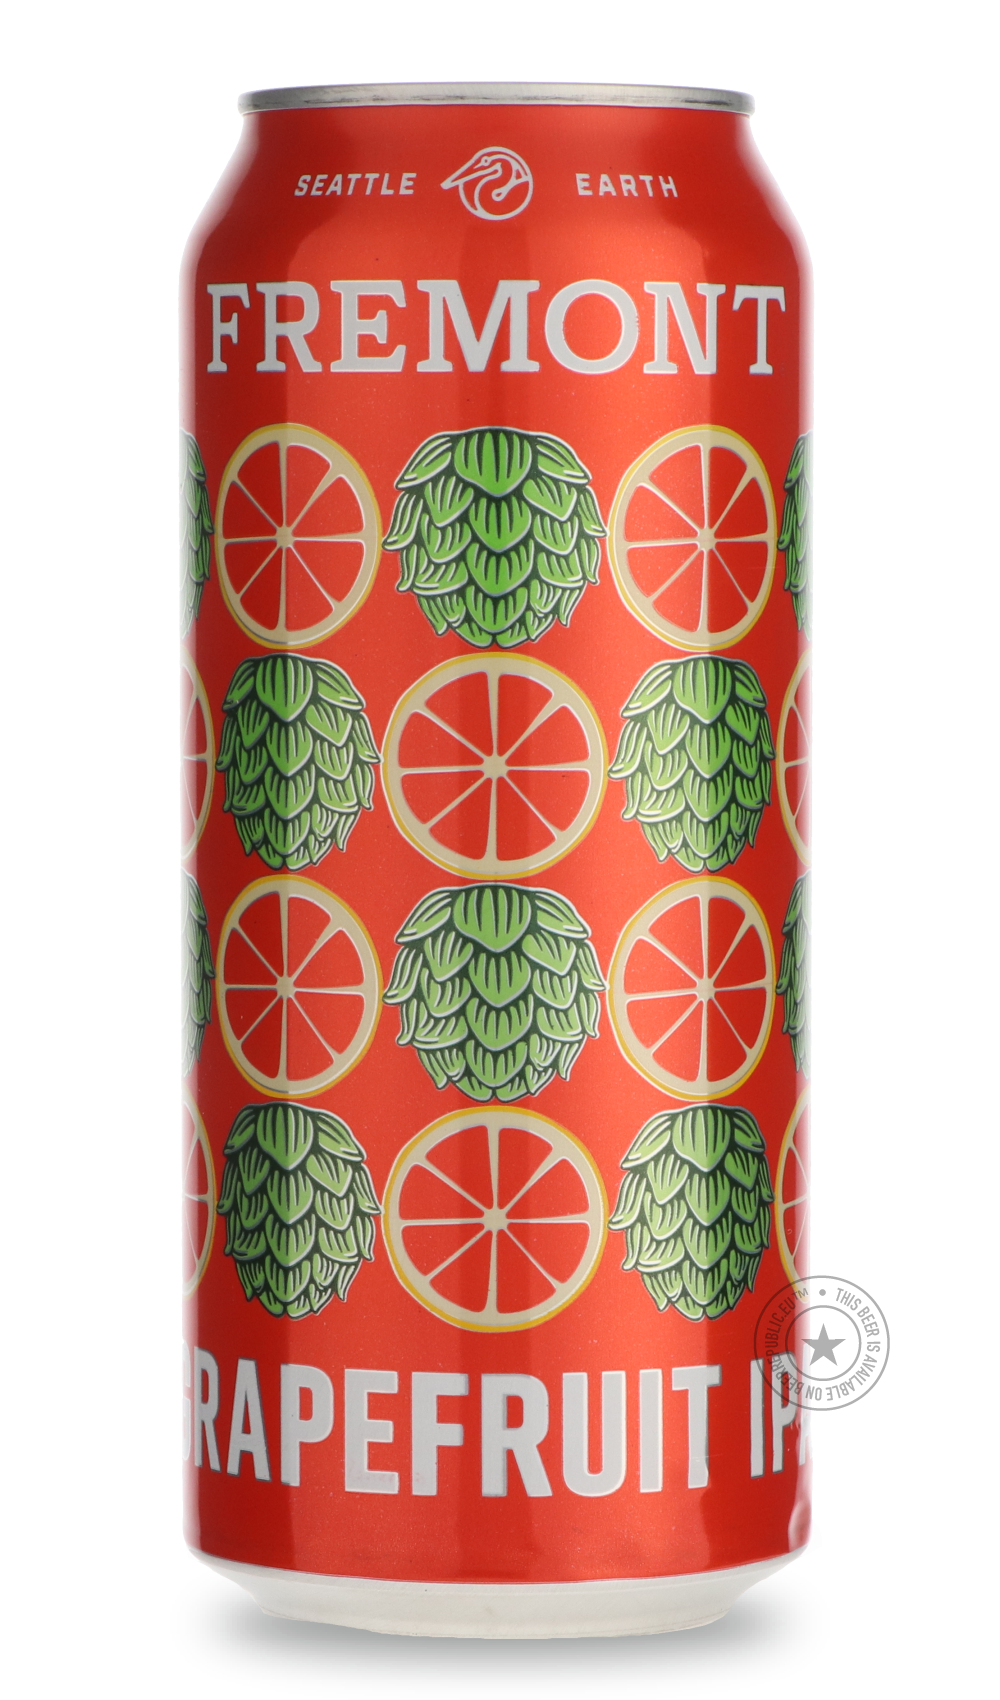 -Fremont- Grapefruit IPA-IPA- Only @ Beer Republic - The best online beer store for American & Canadian craft beer - Buy beer online from the USA and Canada - Bier online kopen - Amerikaans bier kopen - Craft beer store - Craft beer kopen - Amerikanisch bier kaufen - Bier online kaufen - Acheter biere online - IPA - Stout - Porter - New England IPA - Hazy IPA - Imperial Stout - Barrel Aged - Barrel Aged Imperial Stout - Brown - Dark beer - Blond - Blonde - Pilsner - Lager - Wheat - Weizen - Amber - Barley W